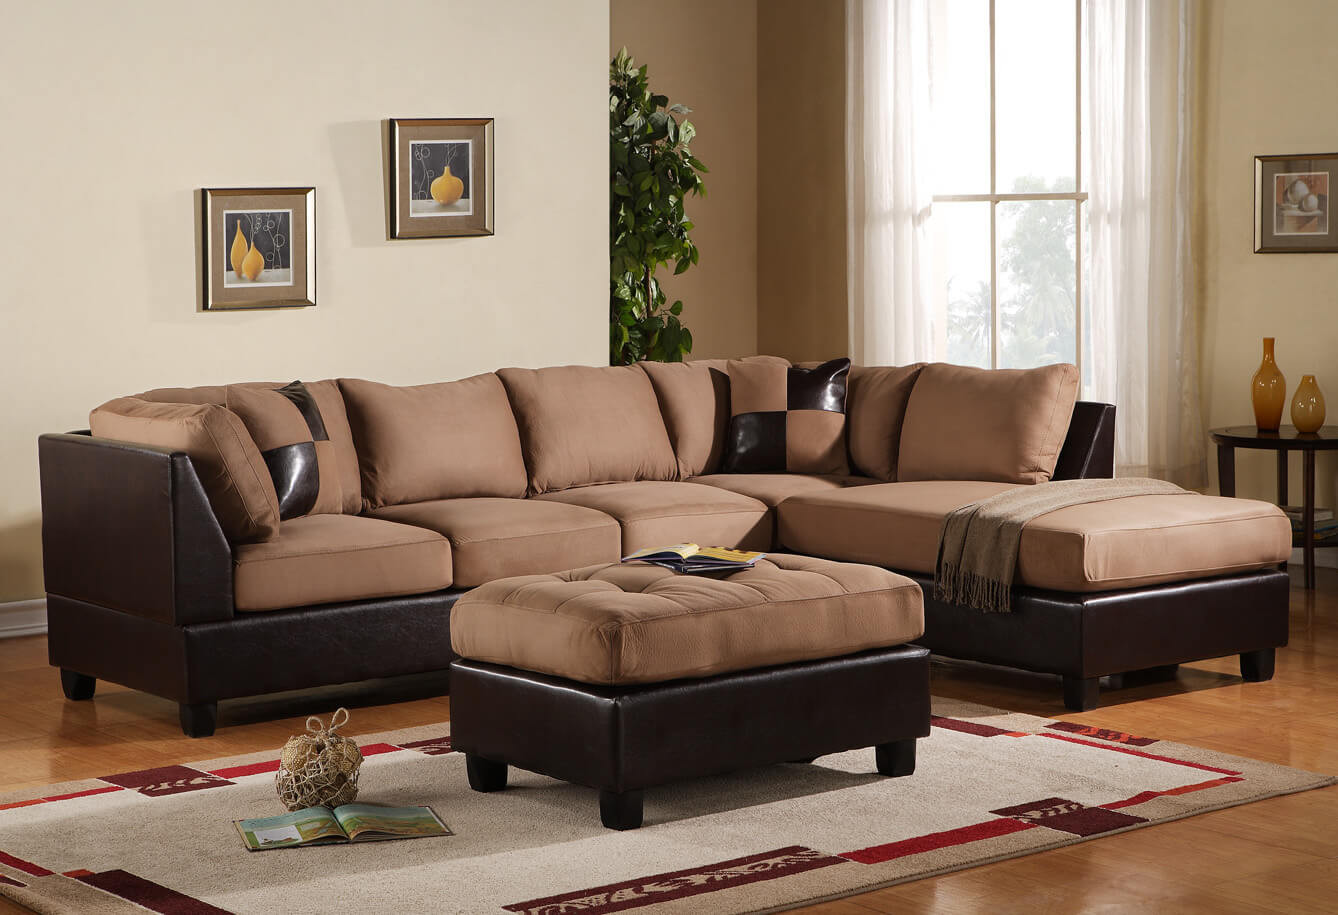 Living Rooms Ideas Brown Sofa
 Living Room Ideas with Brown Sofas TheyDesign